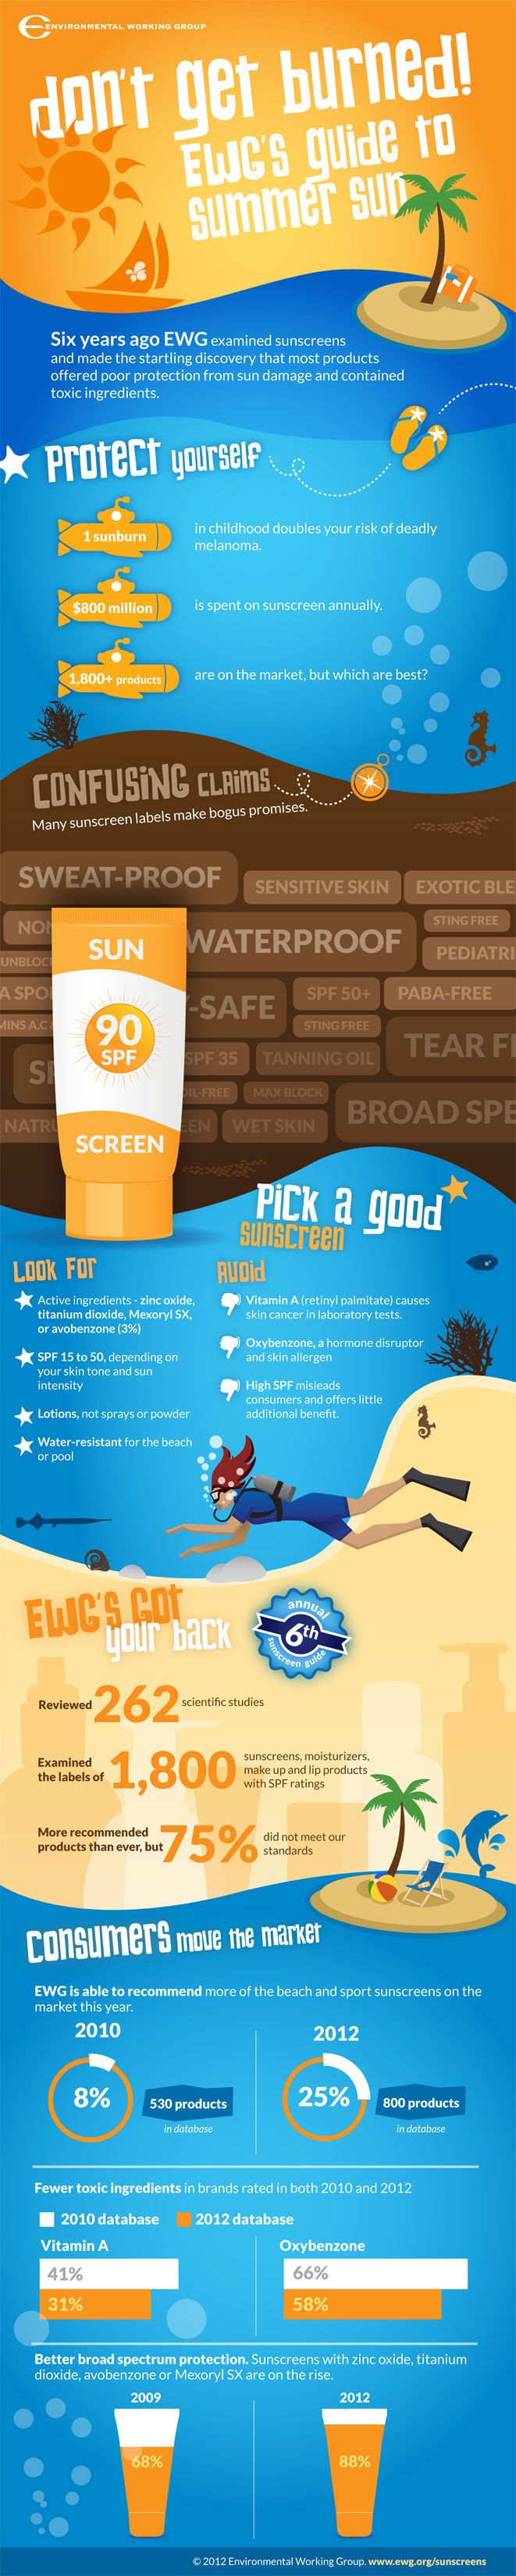 Sunscreen Infographic